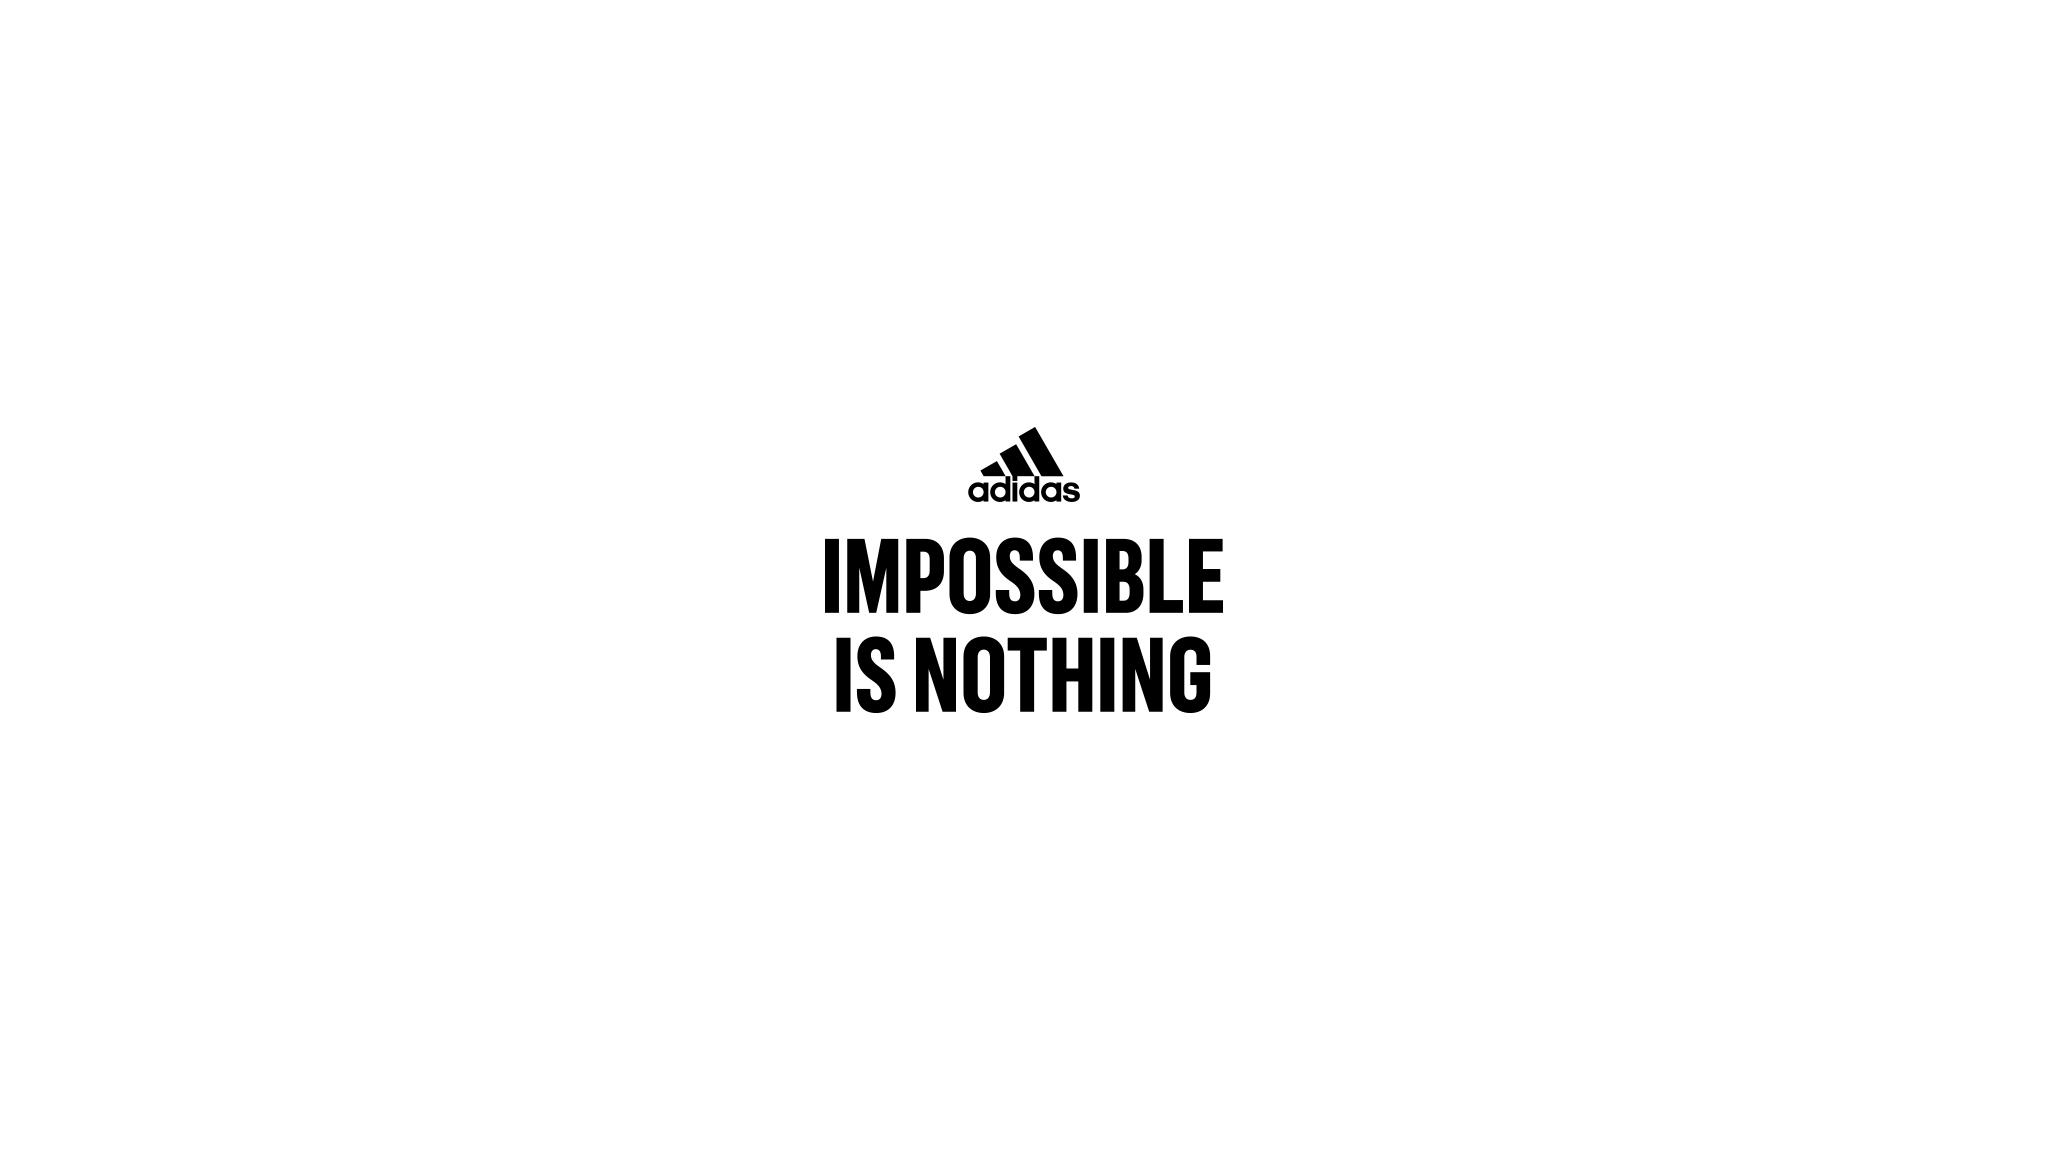 Adidas Impossible is Nothing Adidas Impossible Nothing 1920x1200   Desktop  Mobile Wallpaper